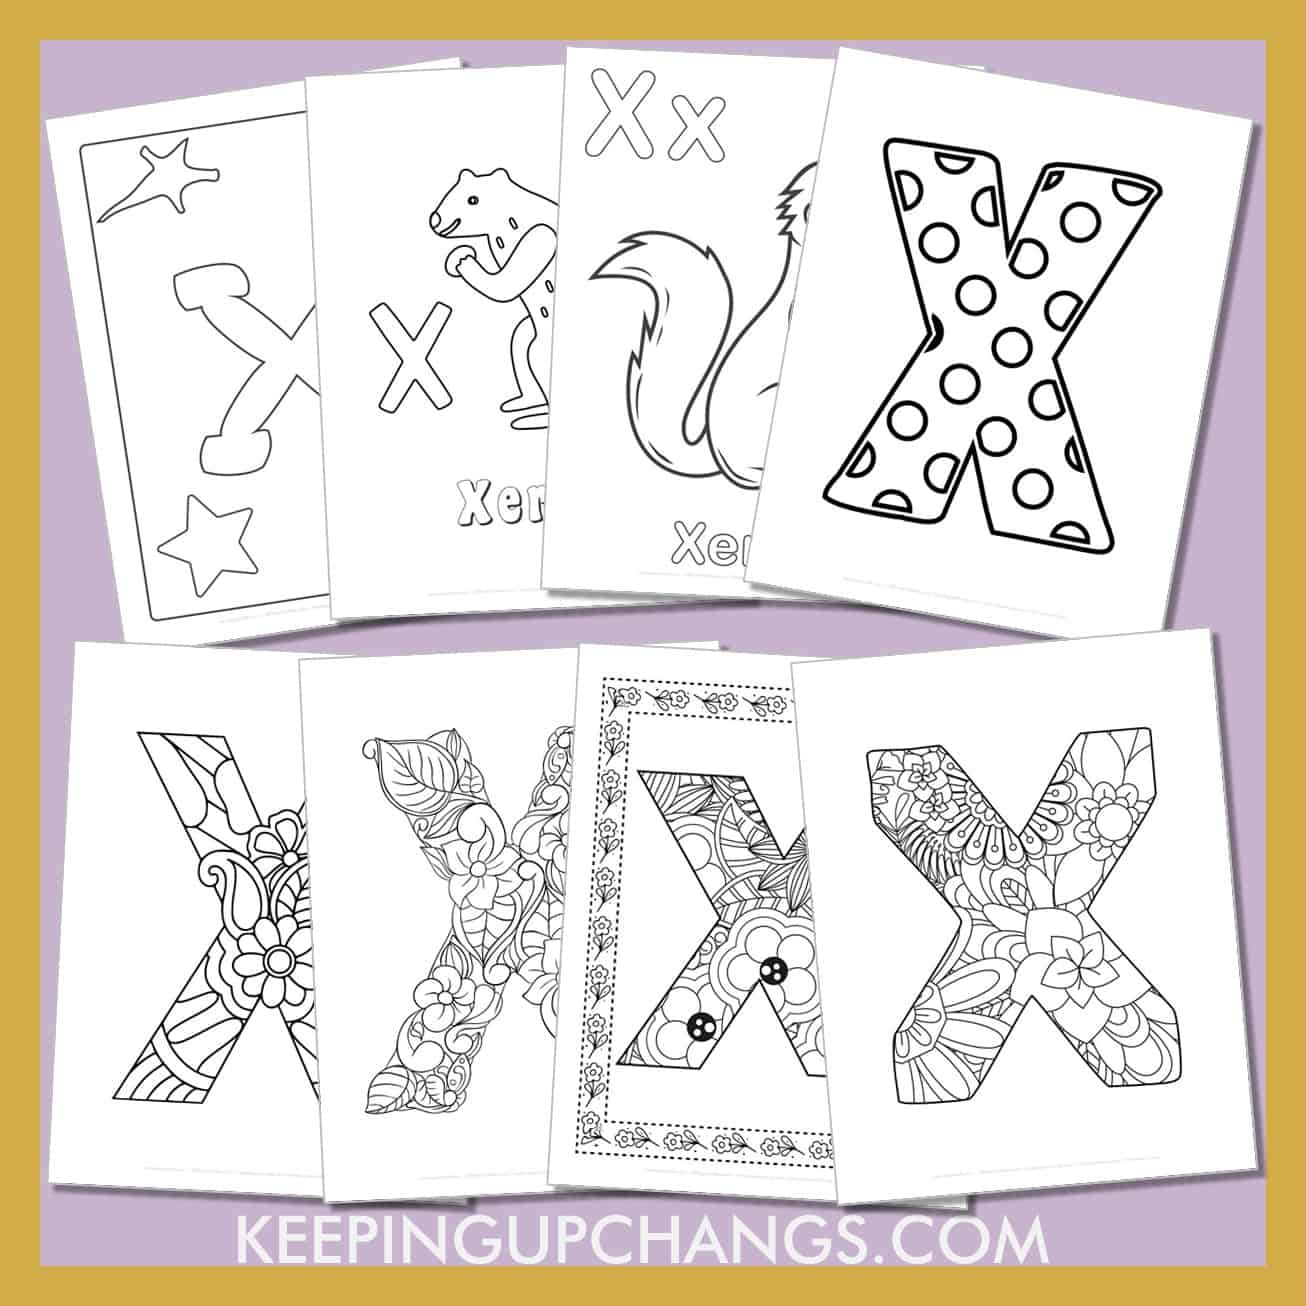 free alphabet letter x to color for toddlers, preschool, kindergarten, to adults.